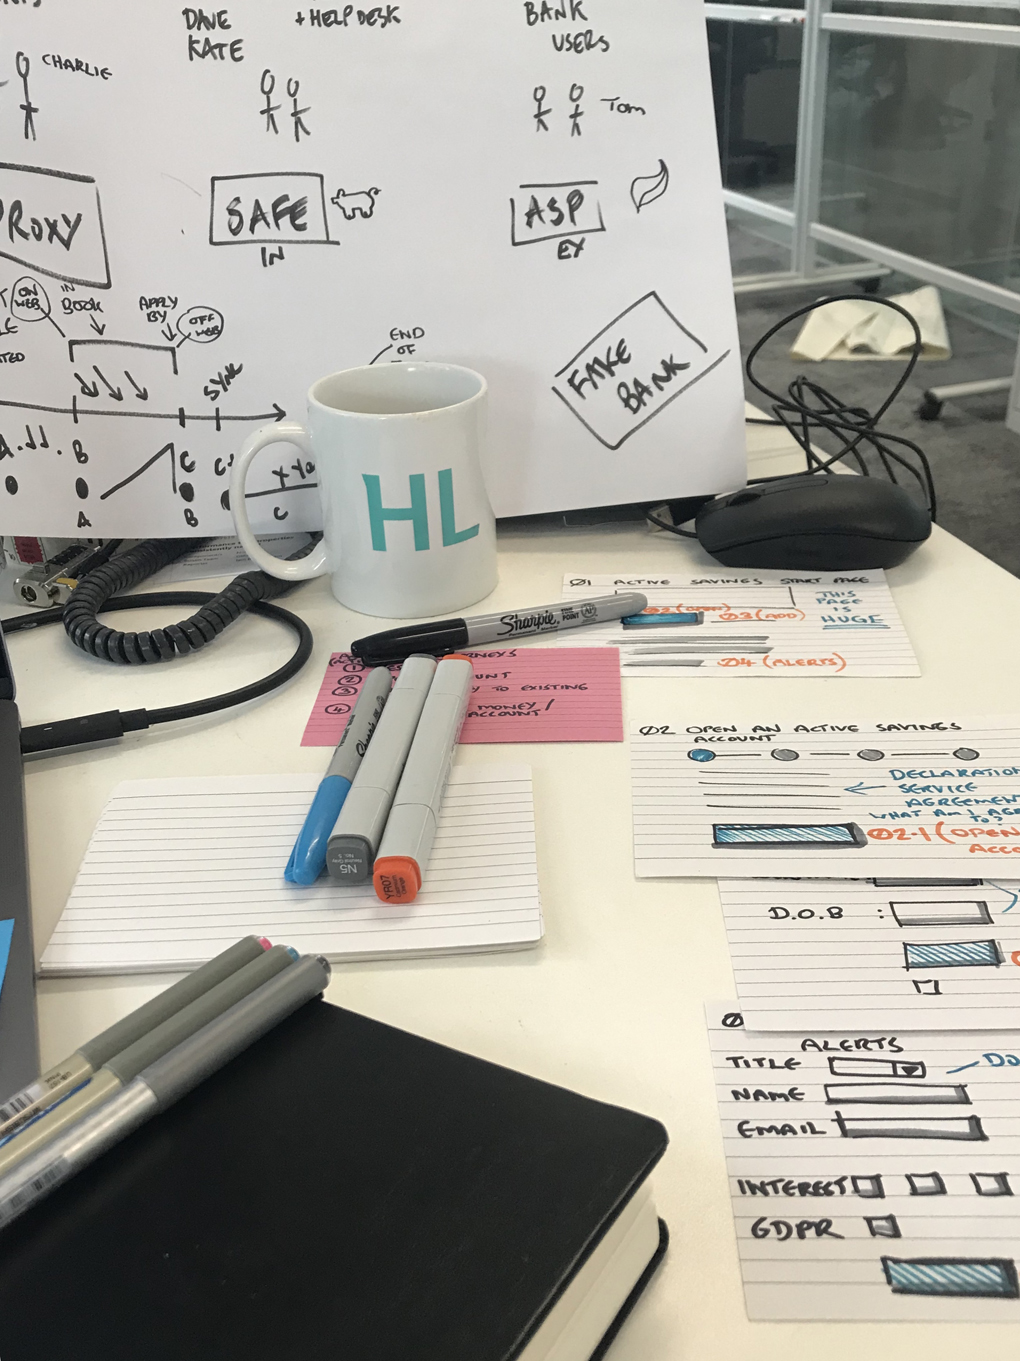 Desk with pens, paper and index cards arranged - showing drawings of the interface for a new product application.